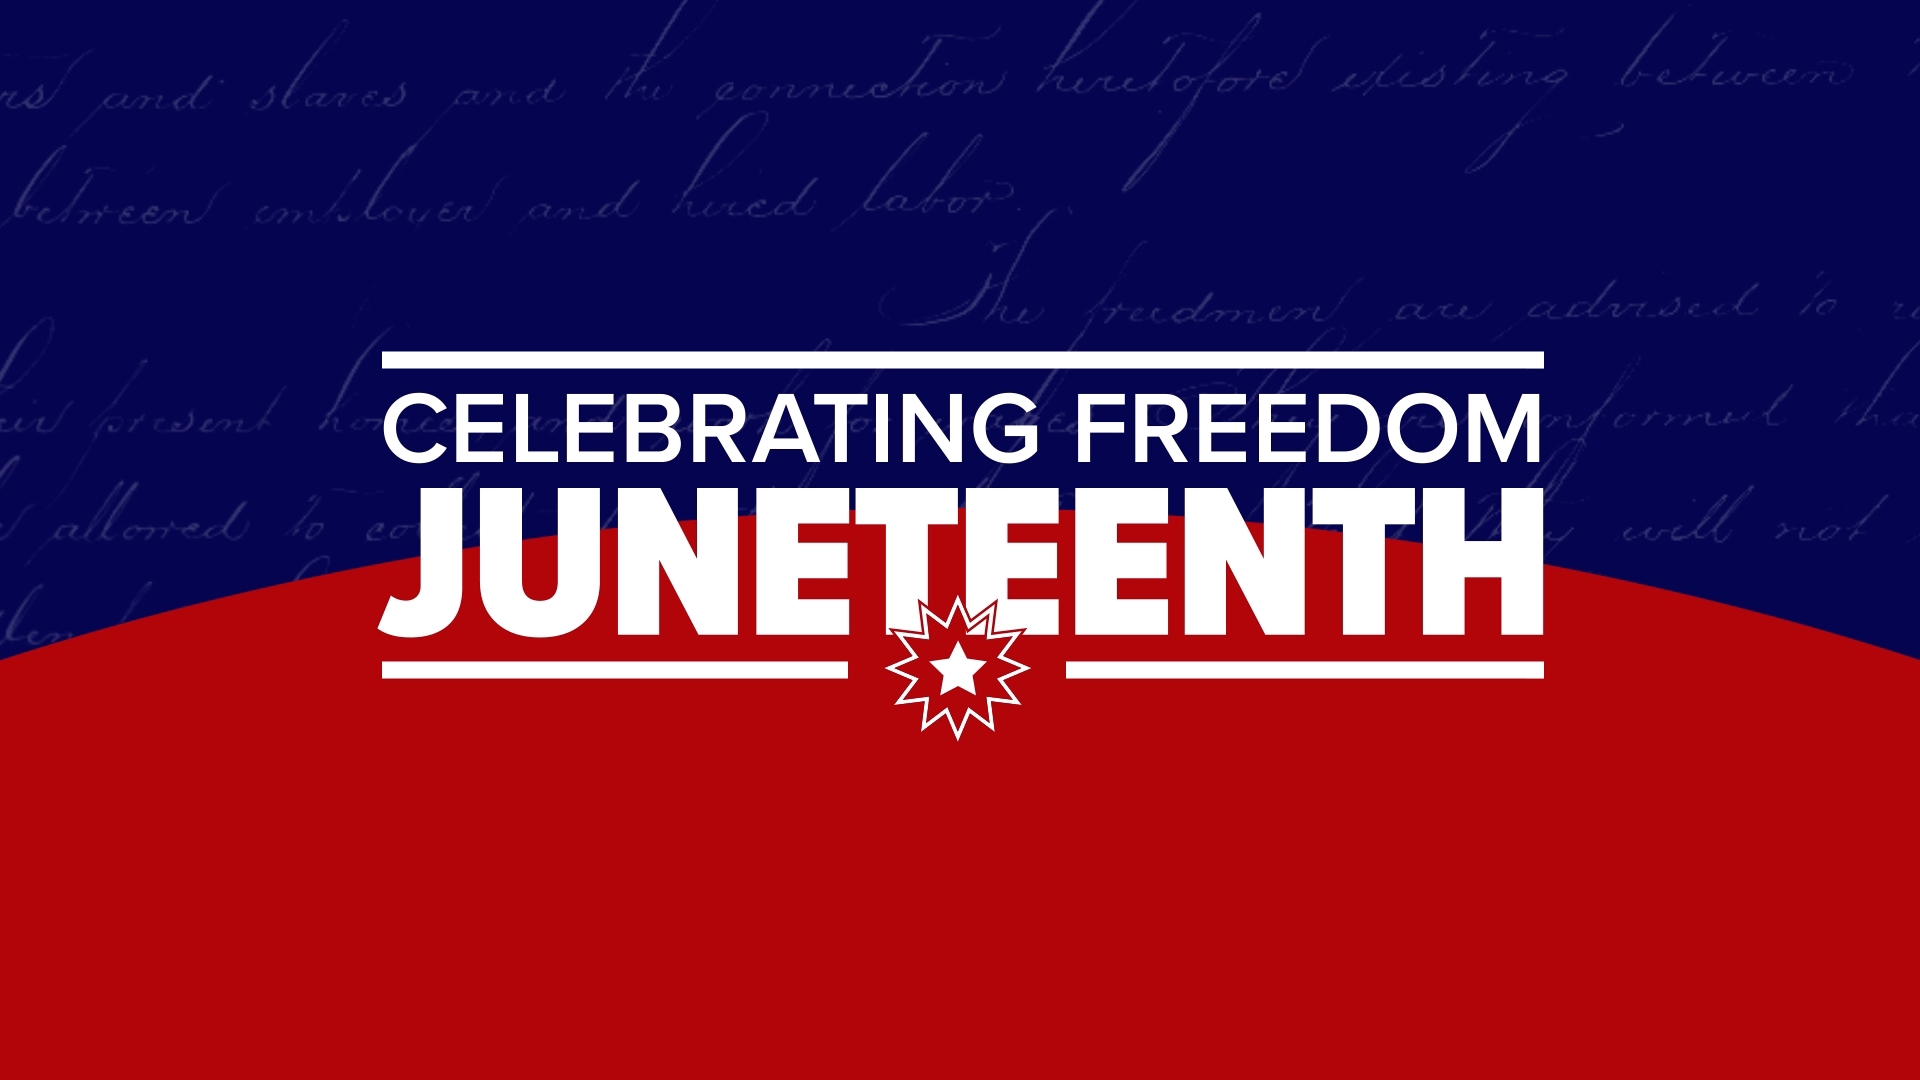 Sharing the history and significance of Juneteenth, as well as the different ways to celebrate and commemorate freedom.